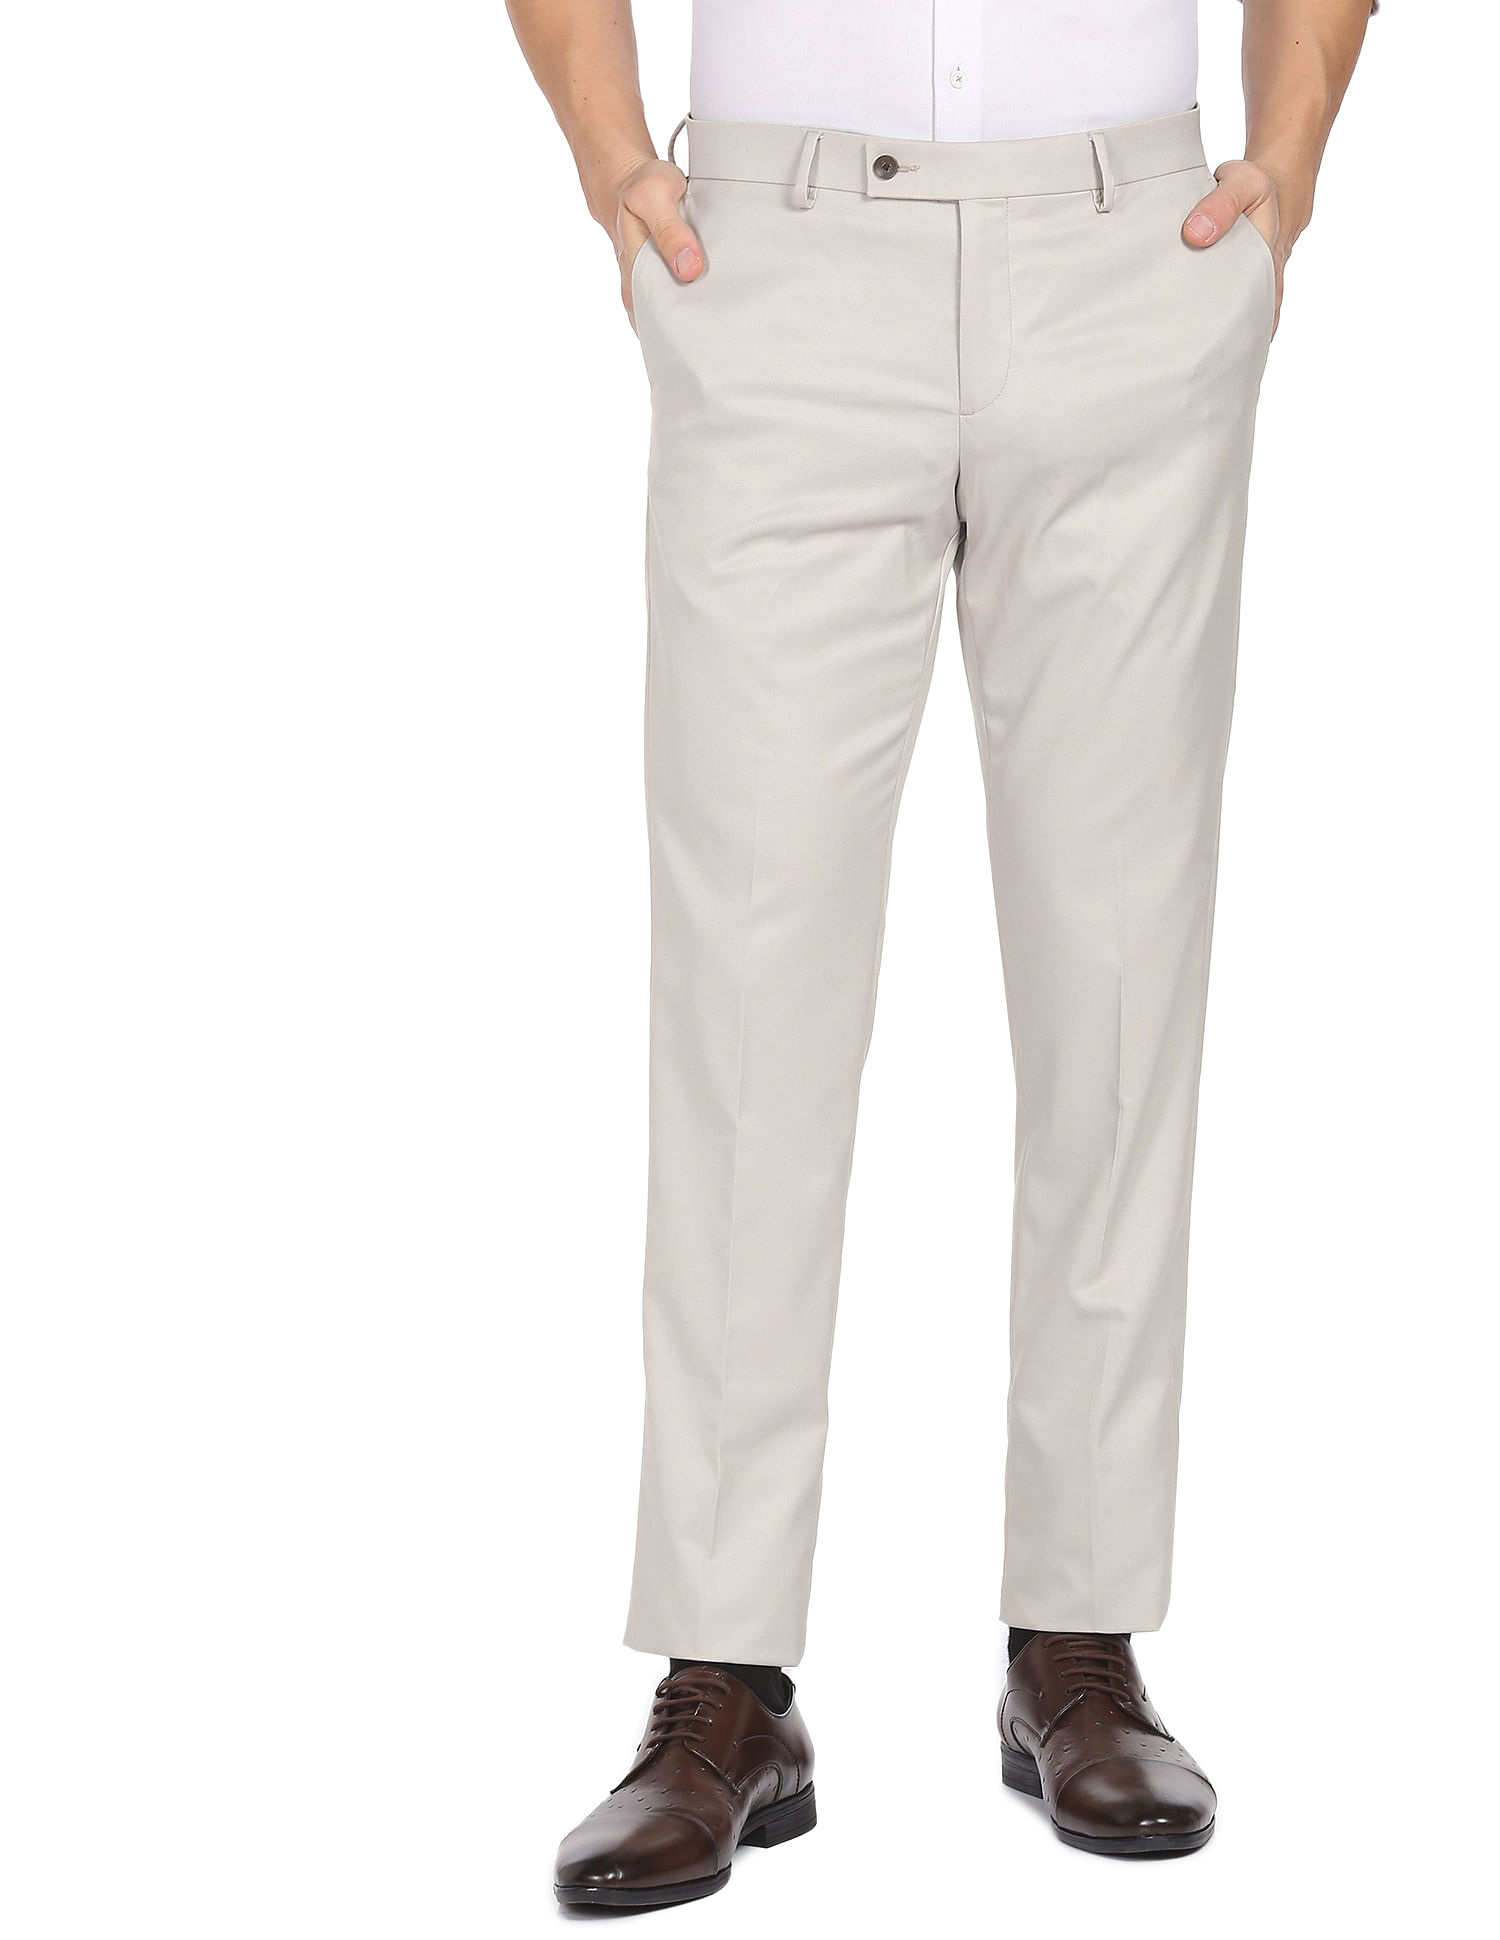 Mens Stone Cargo Trousers